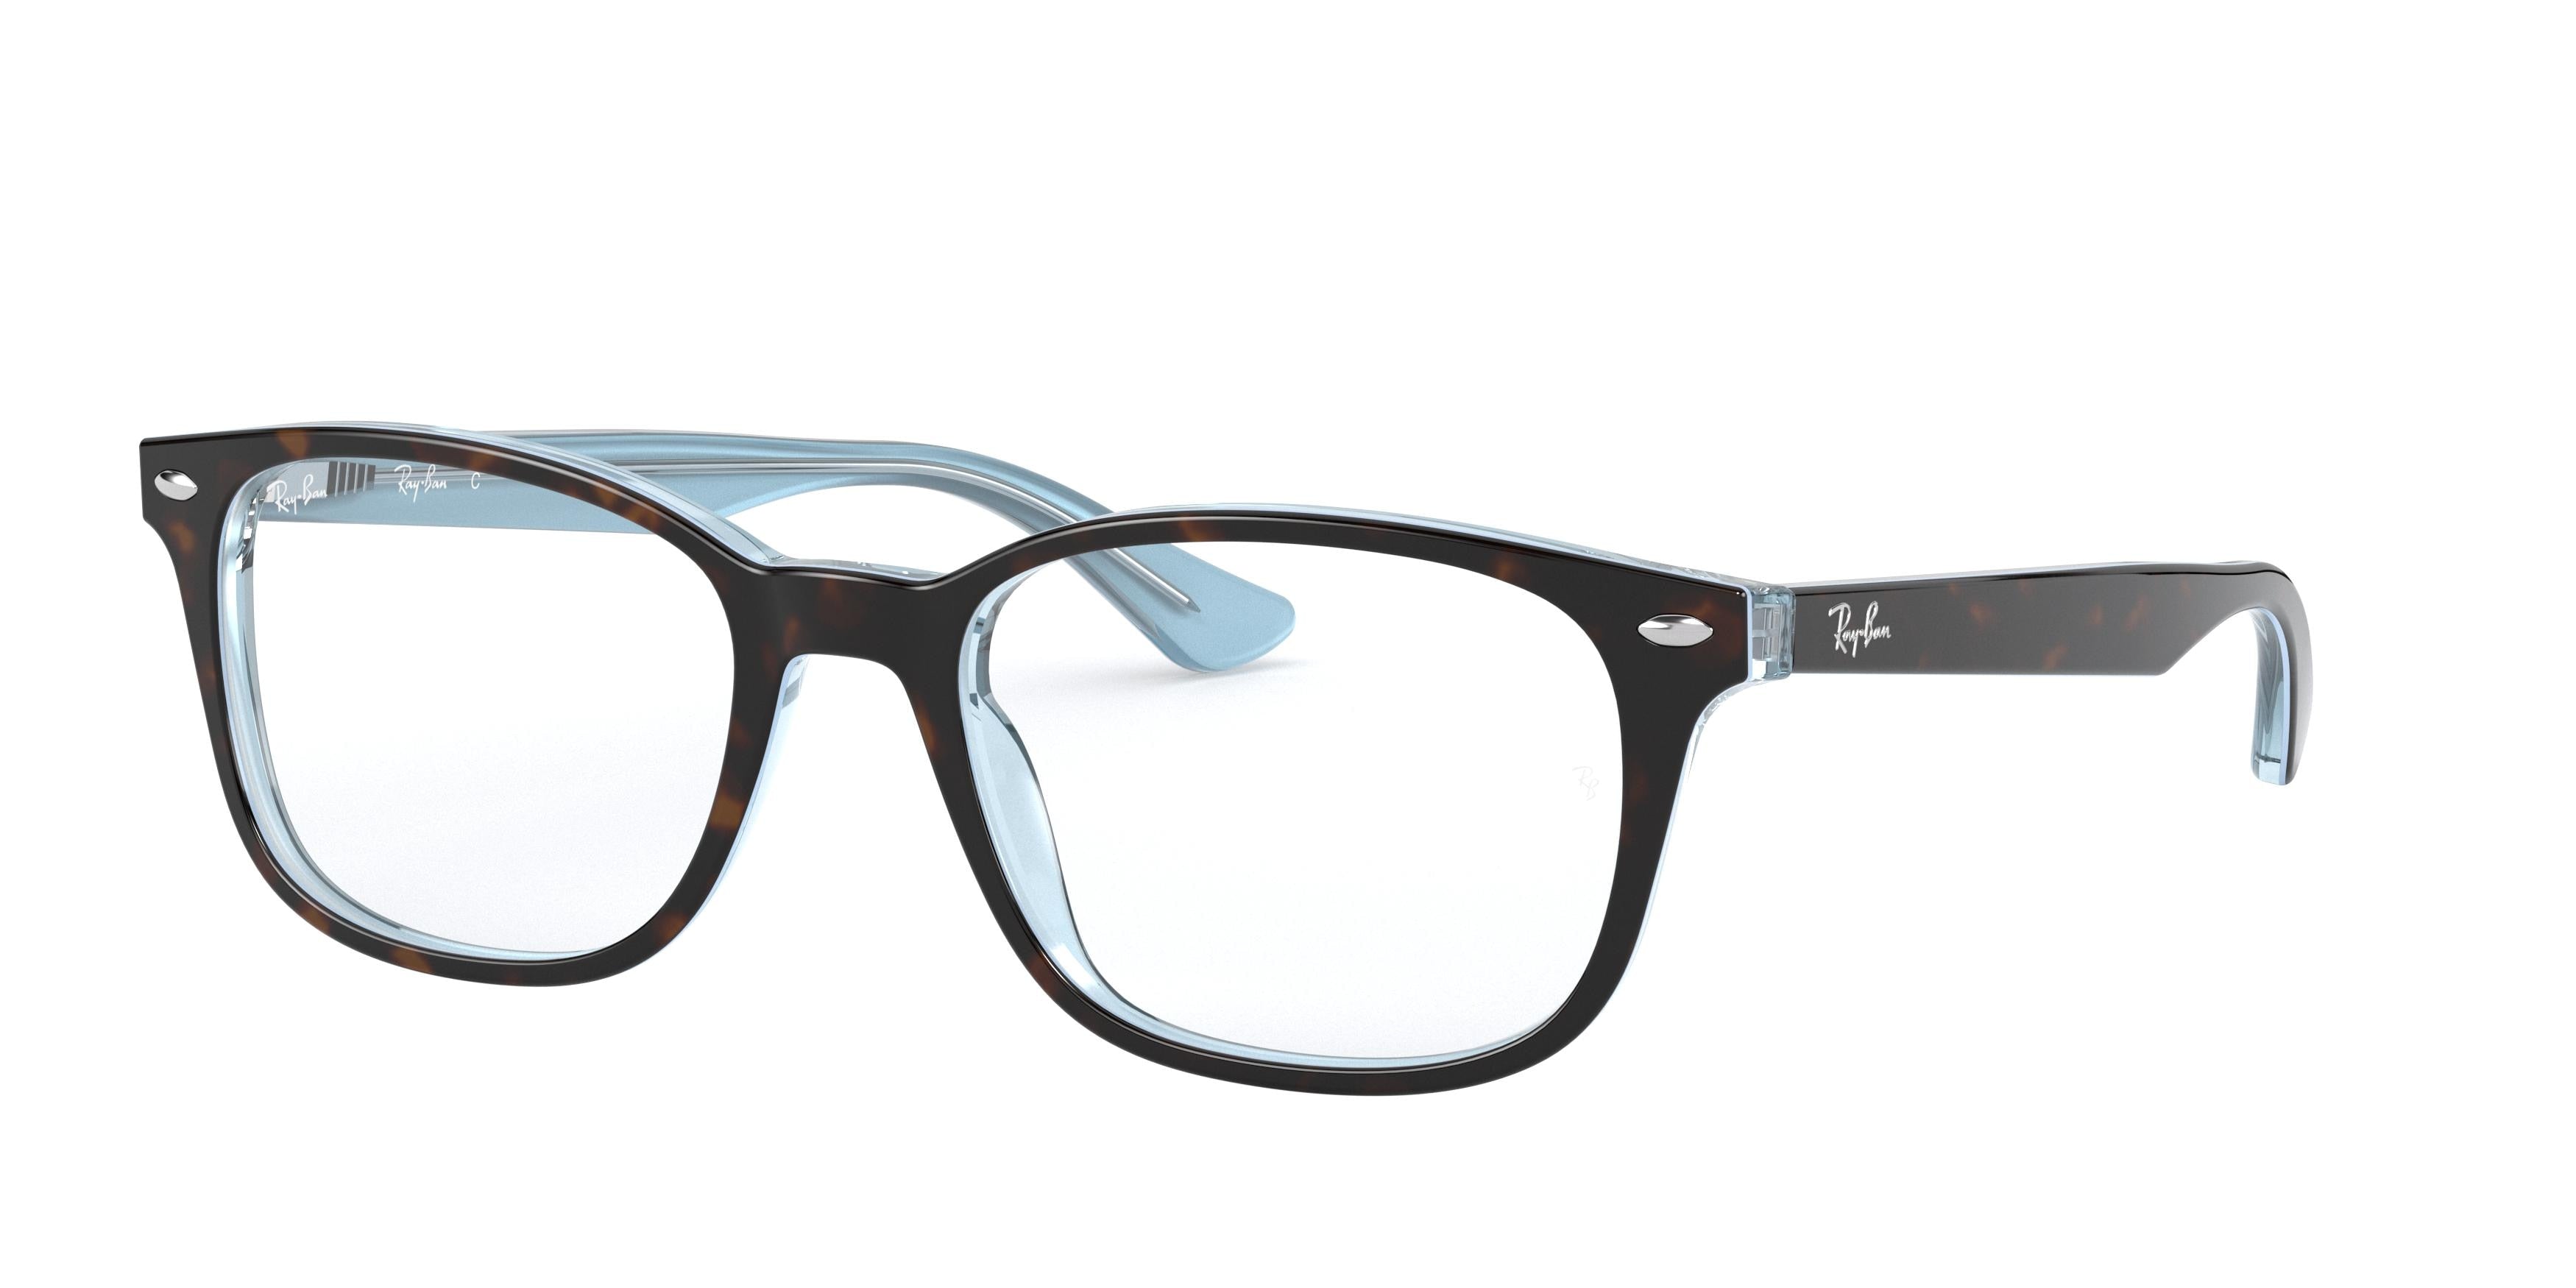 Ray-Ban Optical RX5375 Square Eyeglasses  5883-Havana On Light Blue 53-145-18 - Color Map Brown